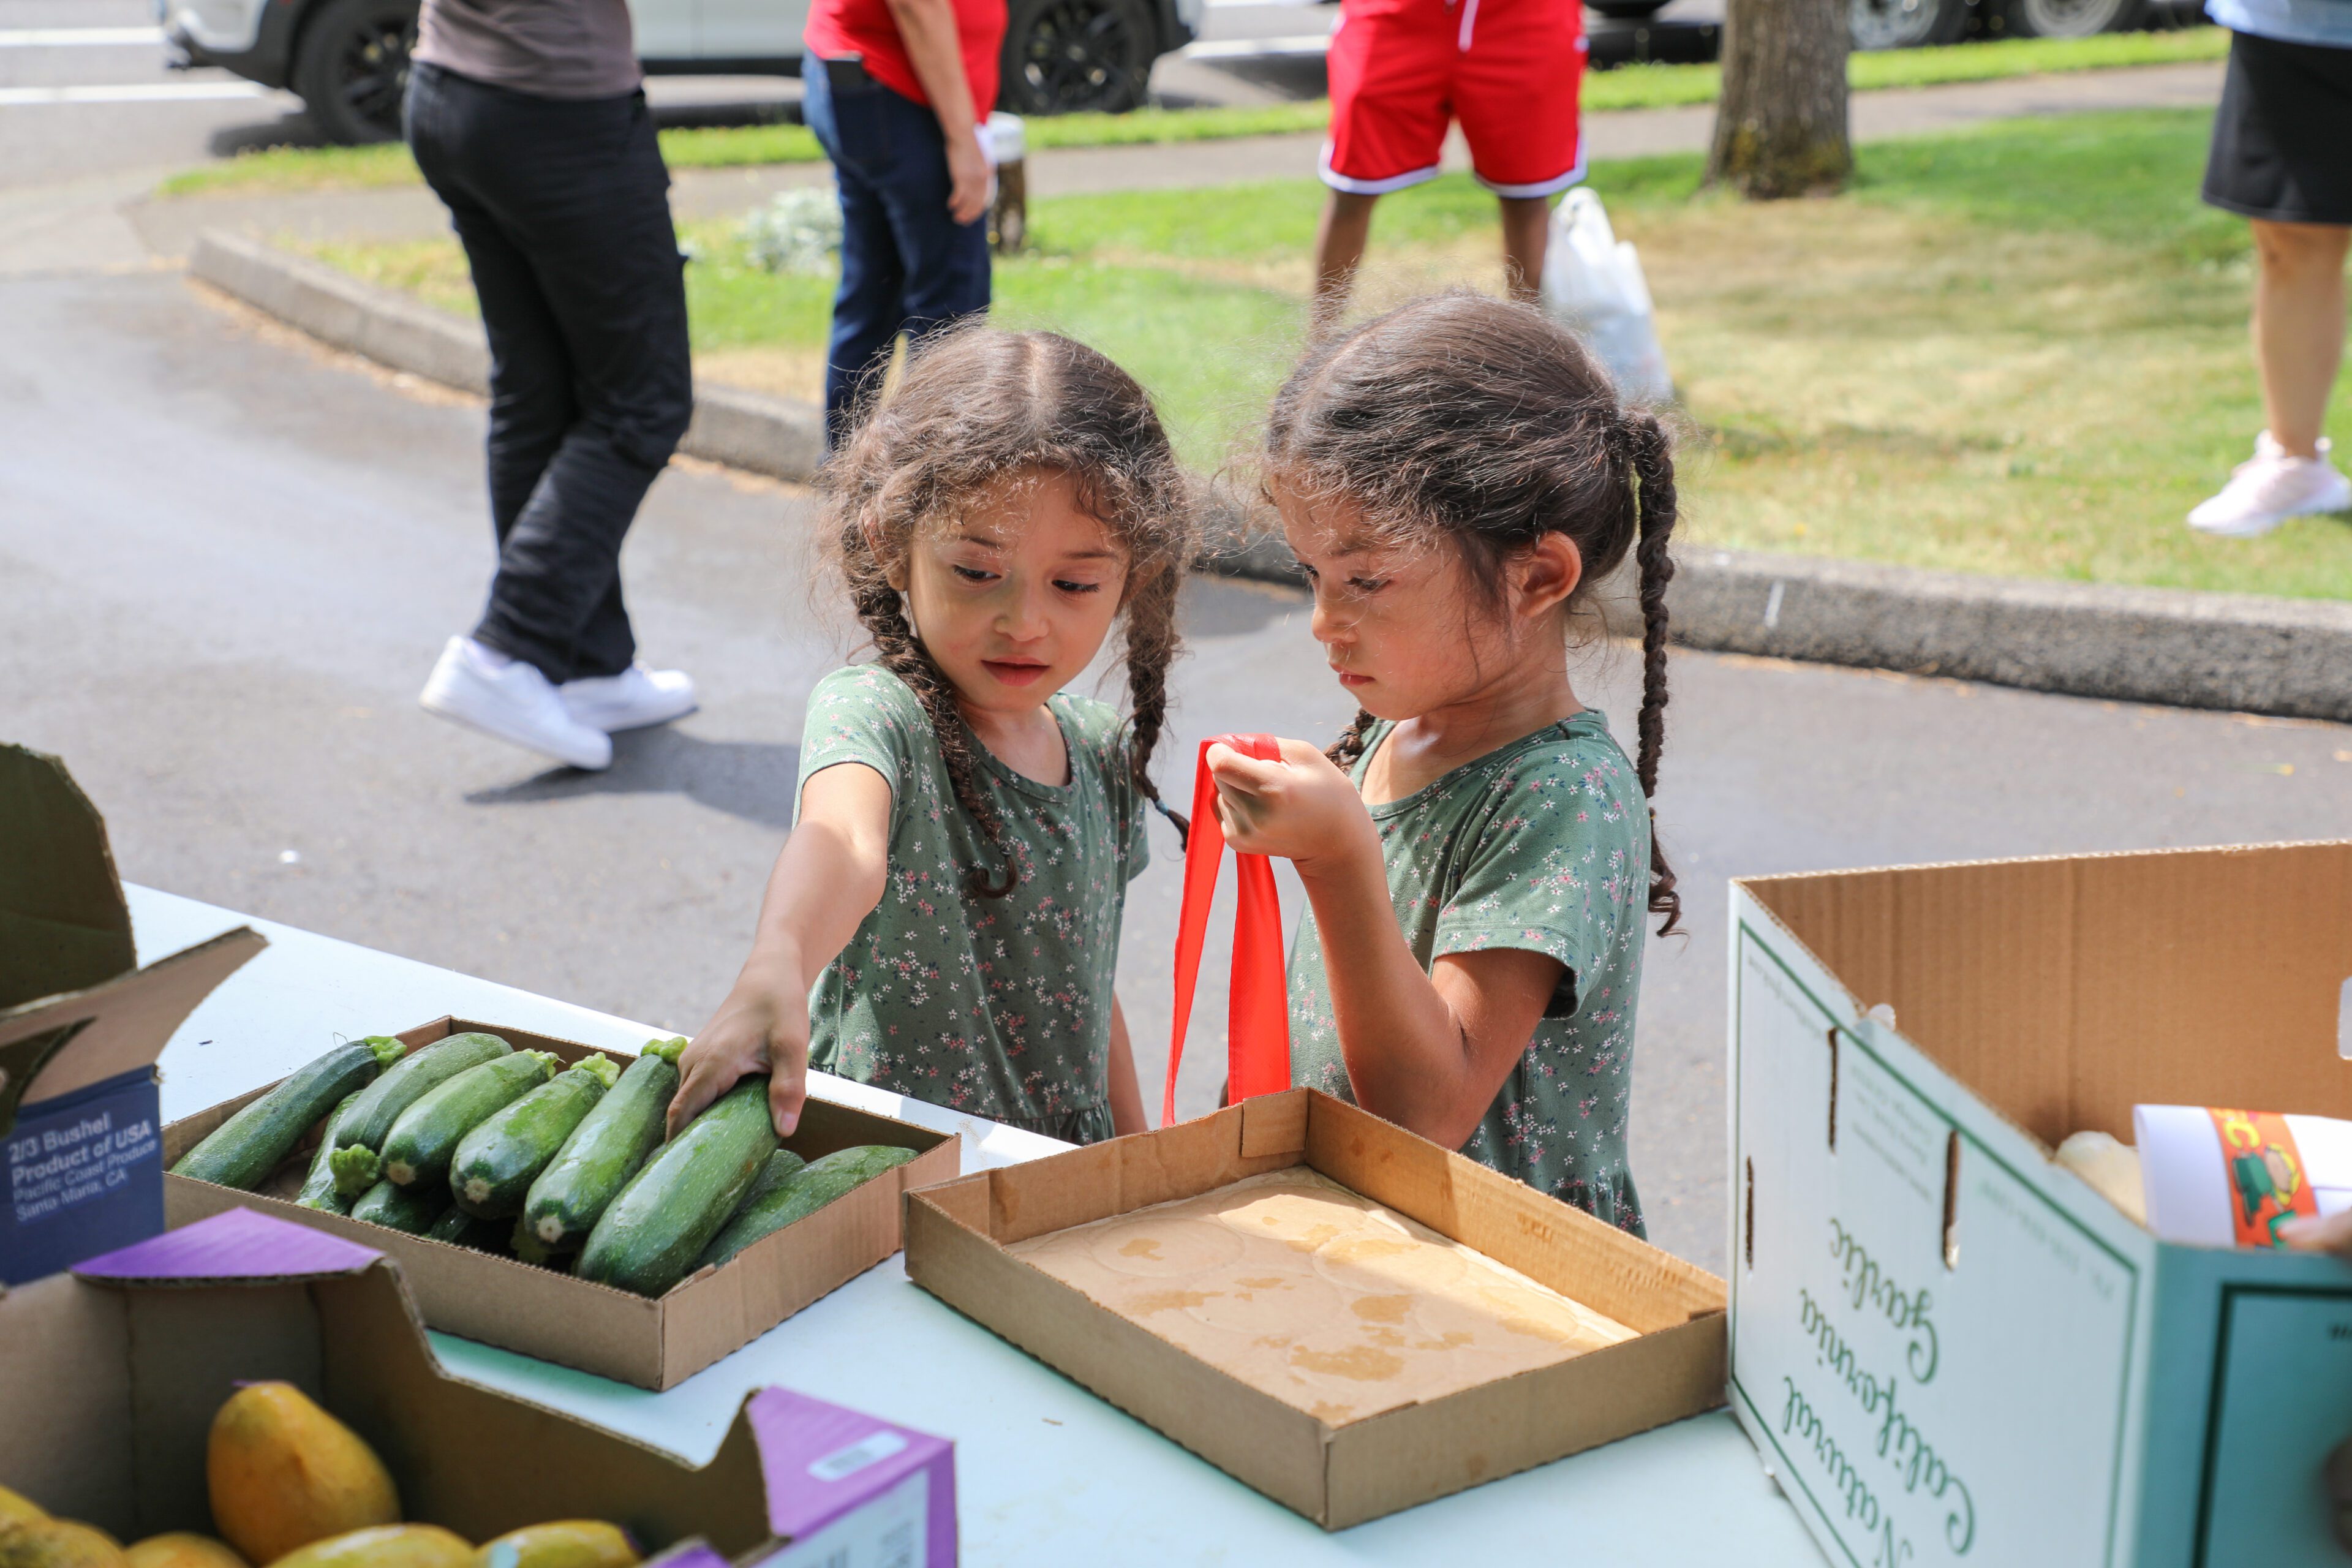 Photo of twin girls in front of a table of produce at the MFS food pantry at Parklane Elementary School. Both girls are wearing green dresses, with their brown hair in braided pigtails. The girl on the left reaches for zucchinis in a box on the table in front of them to place into the bag held by her twin on the right.